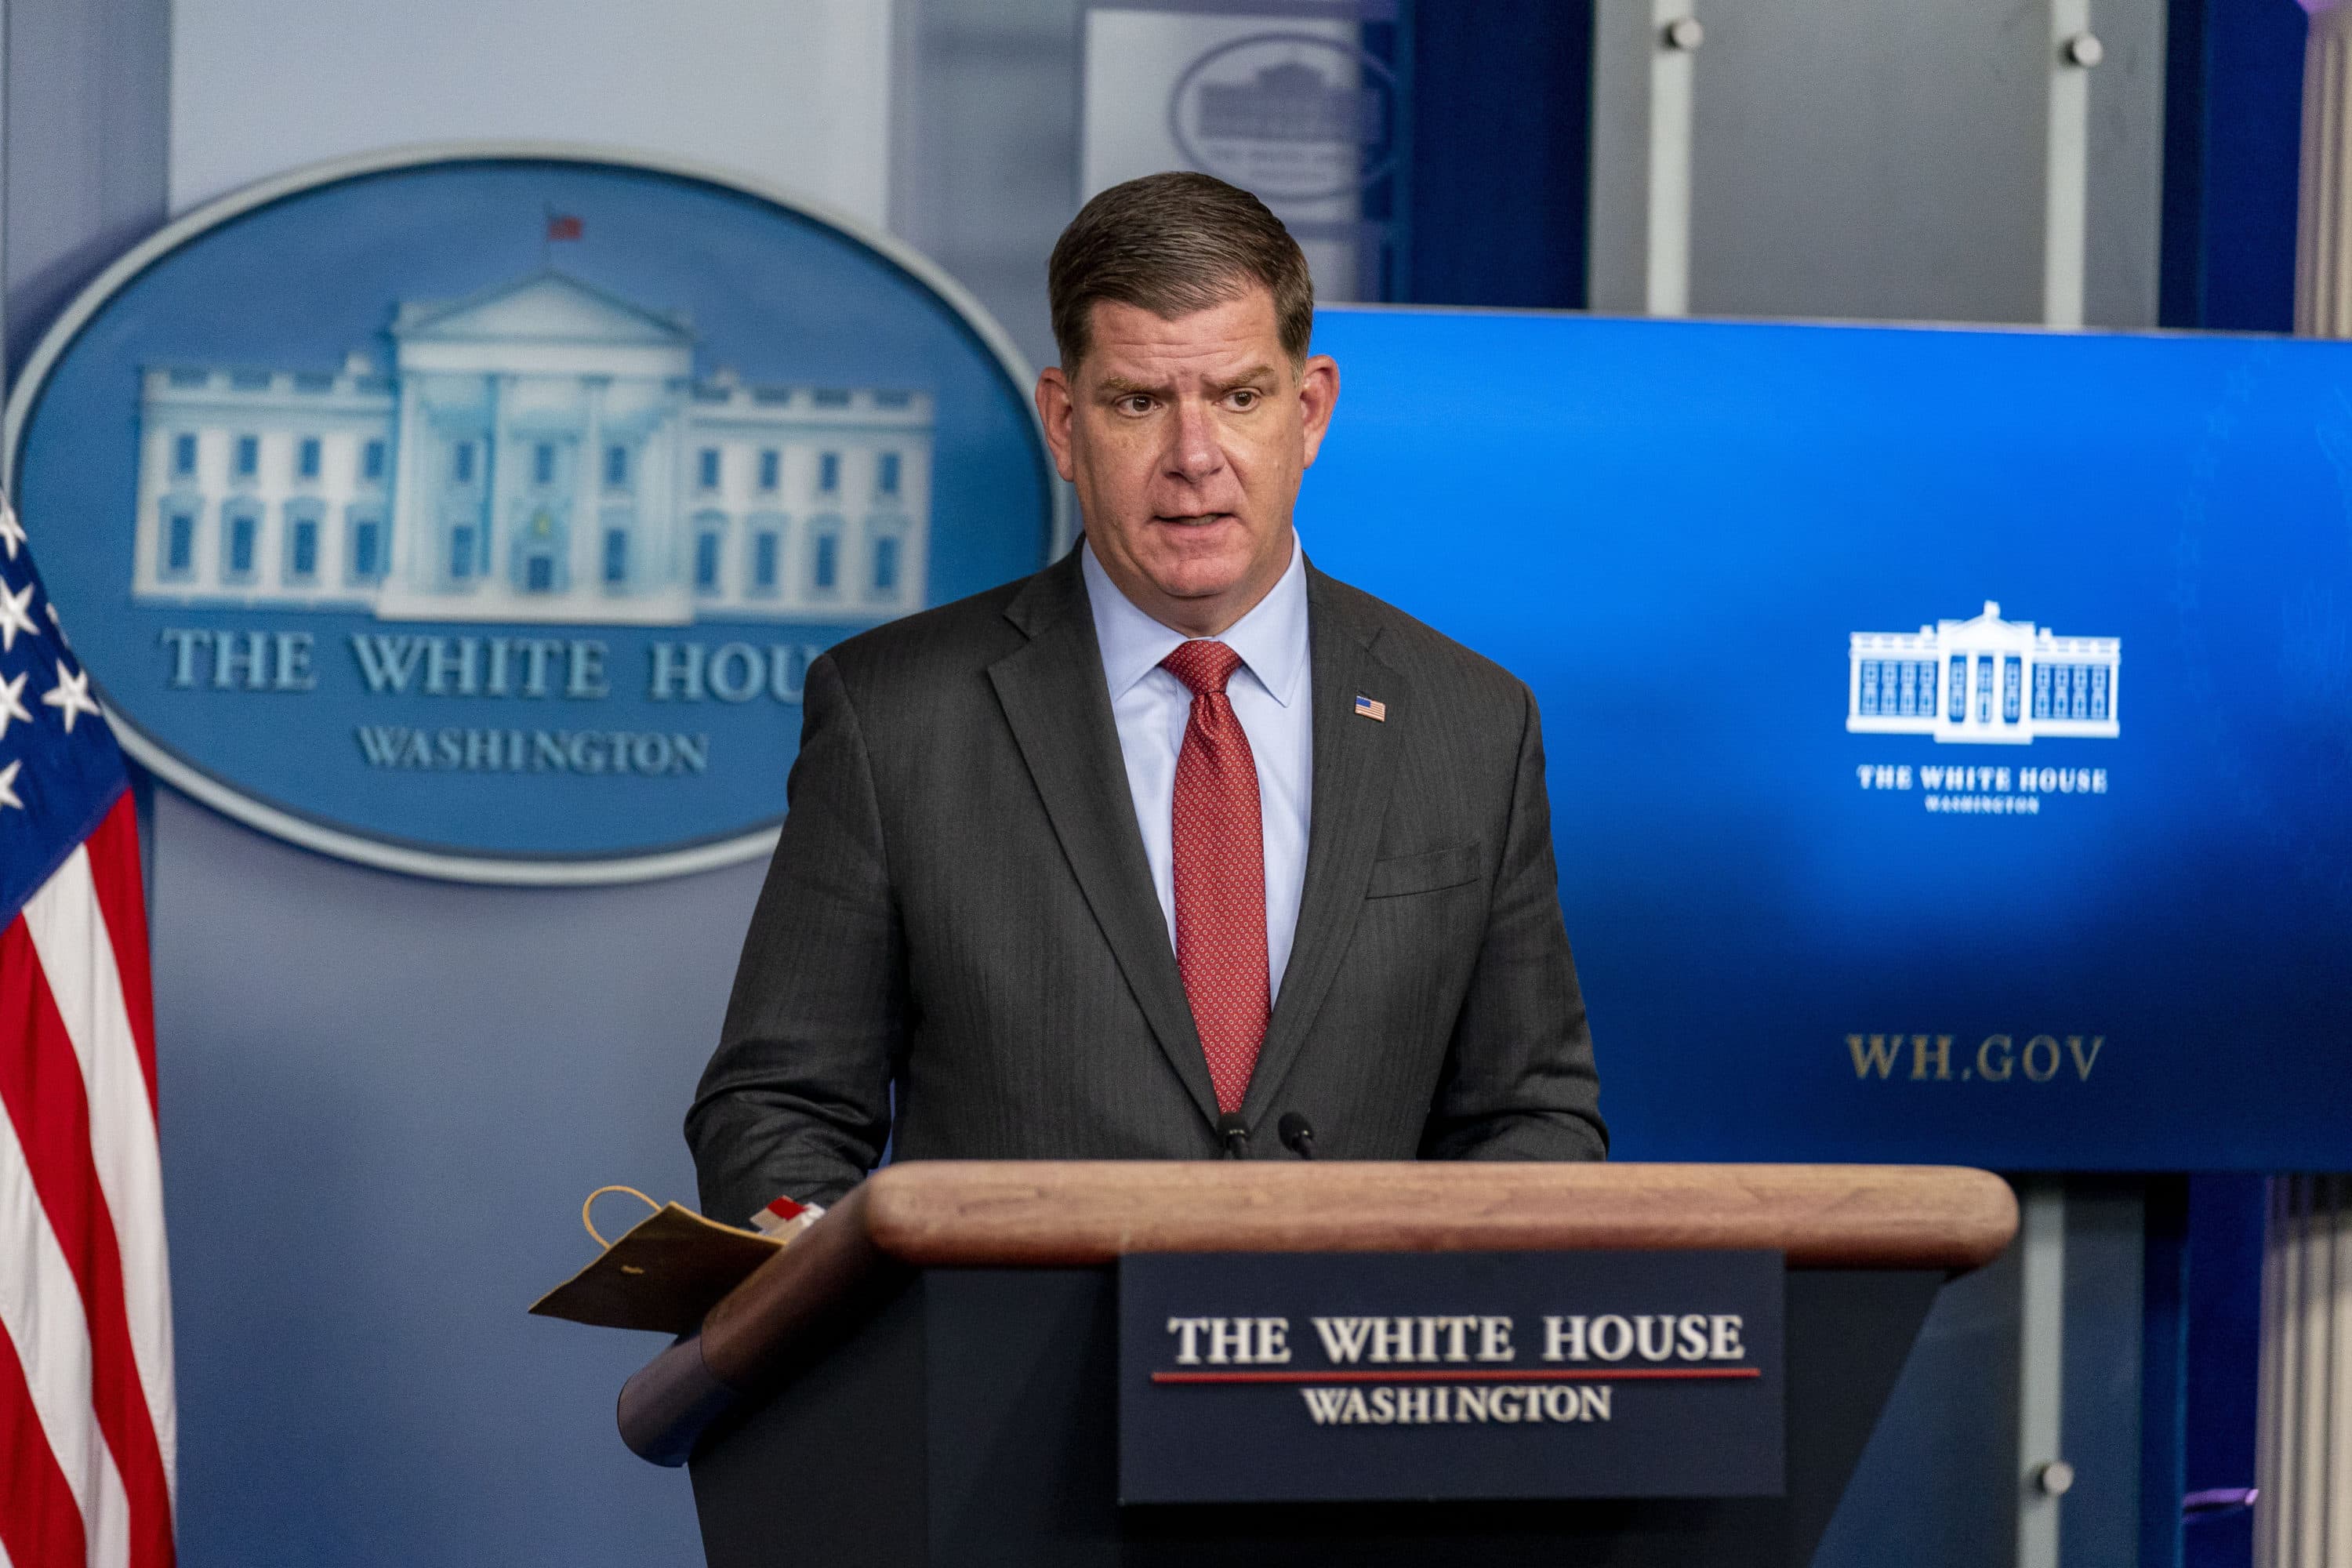 Labor Secretary Marty Walsh speaks at a press briefing at the White House on April 2, 2021, in Washington, D.C. (Andrew Harnik/AP)